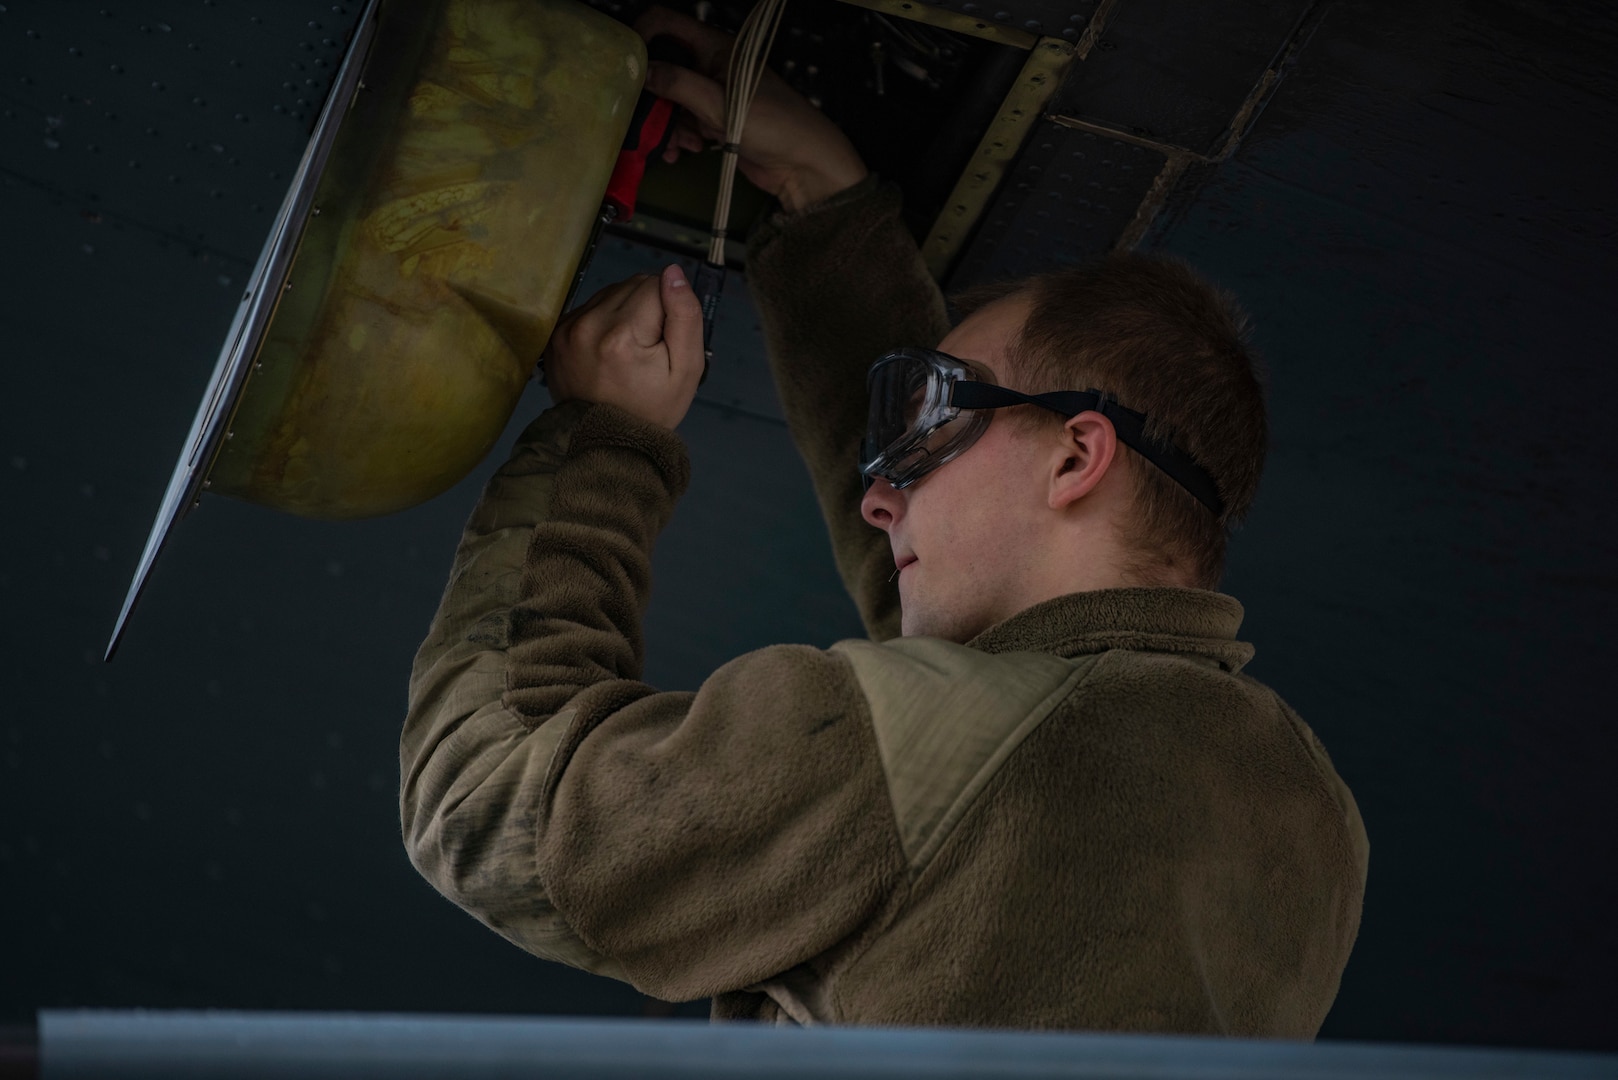 U.S. Air Force Senior Airman Kyle Sexton, 317th Aircraft Maintenance Squadron electrical environmental technician, wraps safety wire on a C-130J Super Hercules at Pope Army Airfield, North Carolina, Jan. 25, 2023. During Battalion Mass Tactical Week, Sexton completed aircraft maintenance, ensuring that each C-130 was mission capable. (U.S. Air Force photo by Airman 1st Class Ryan Hayman)